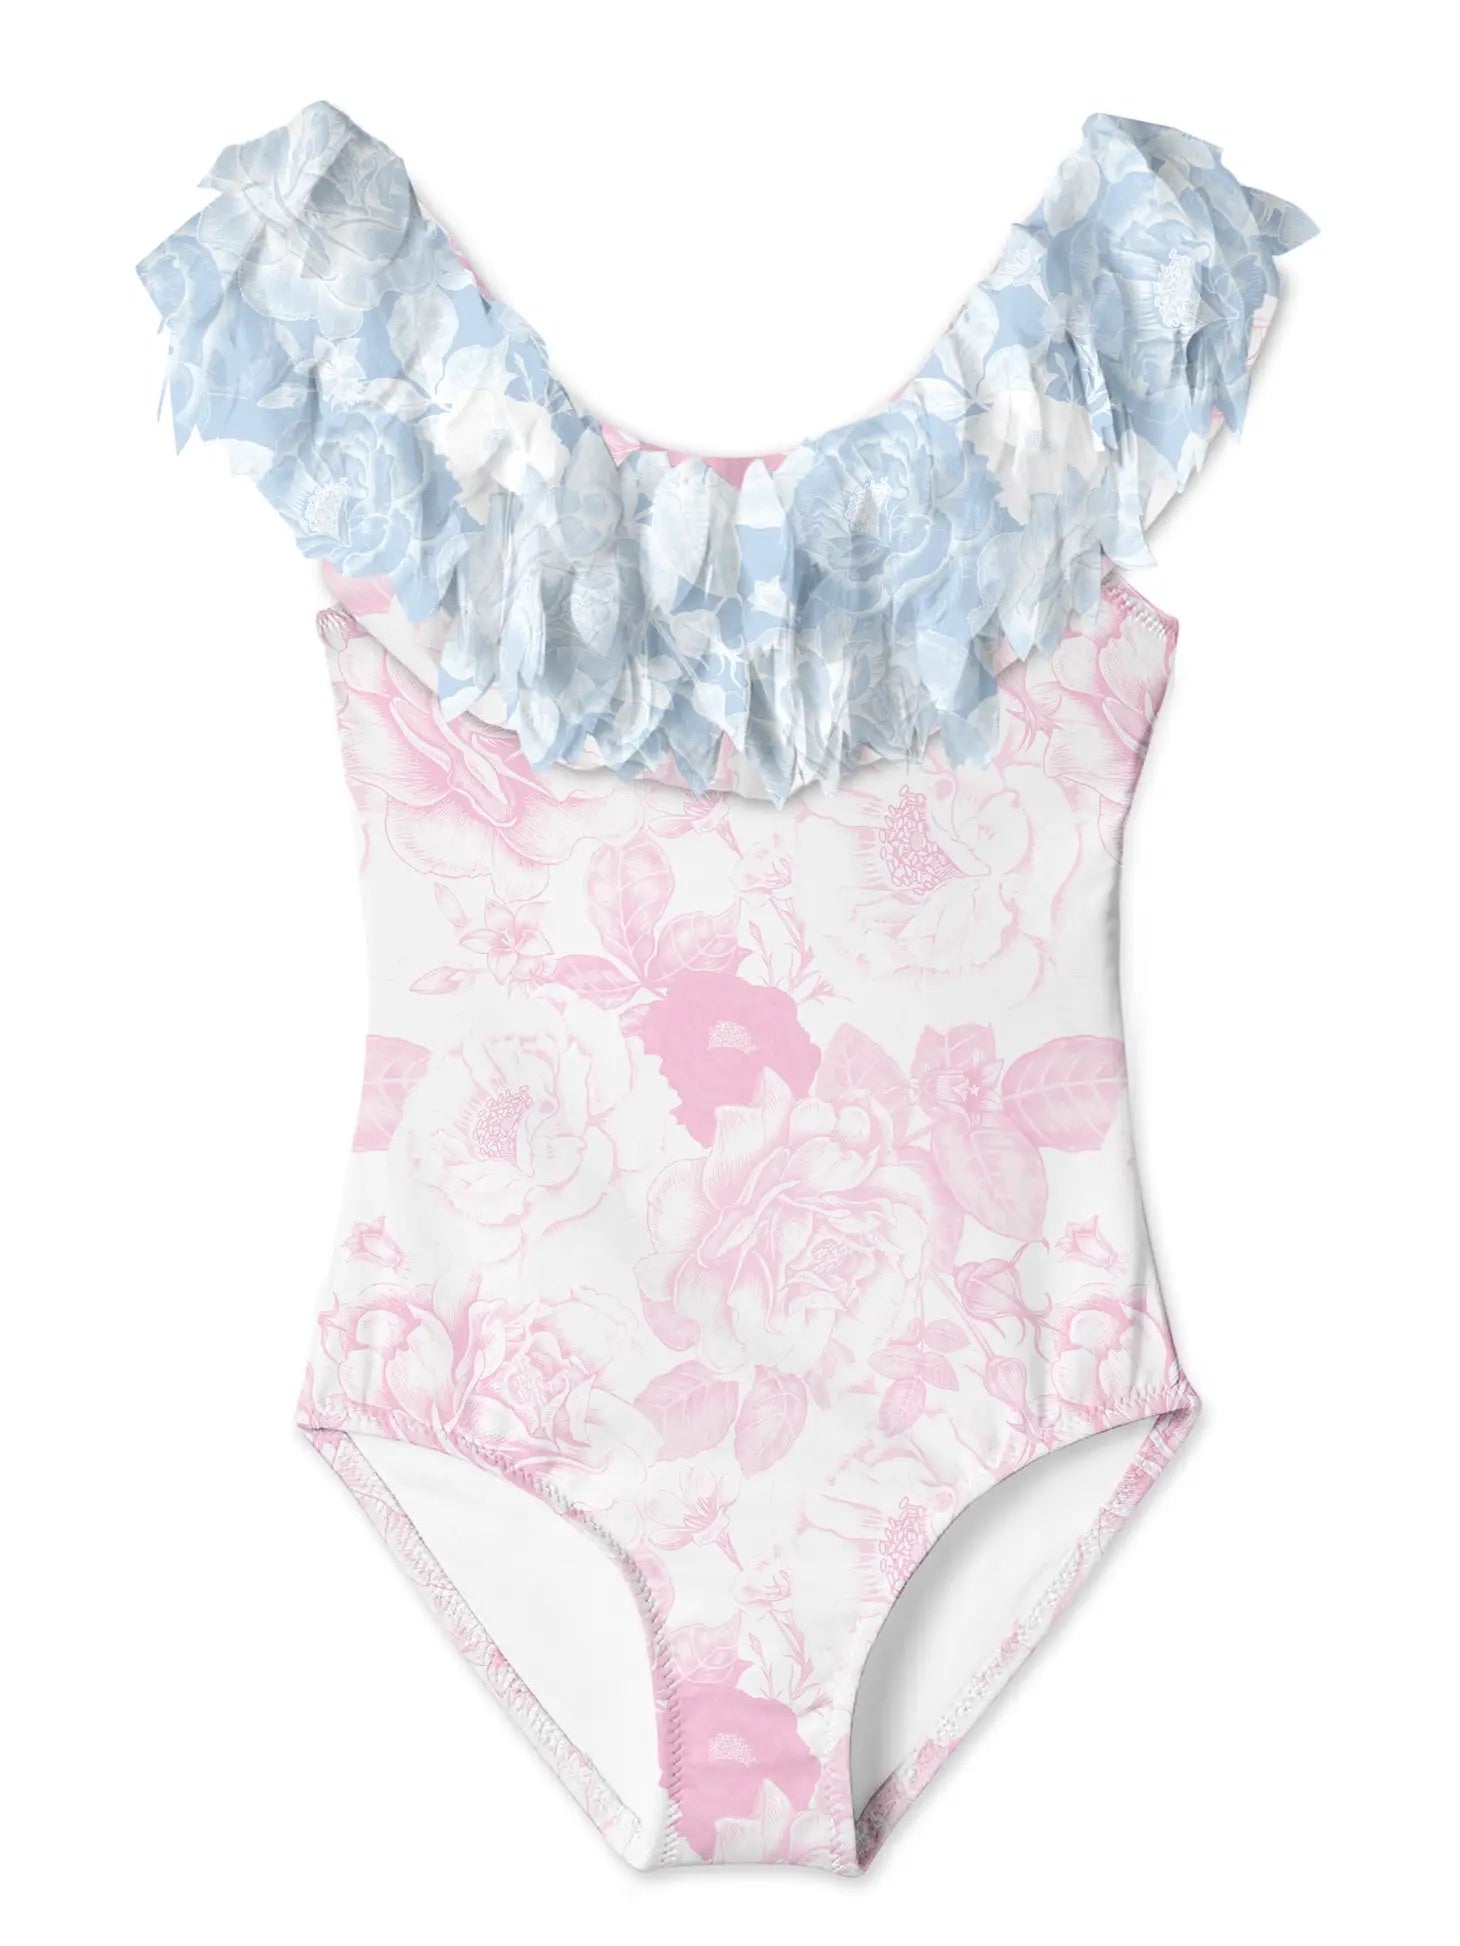 Rose Ruffle Swimsuit - Pink & Blue